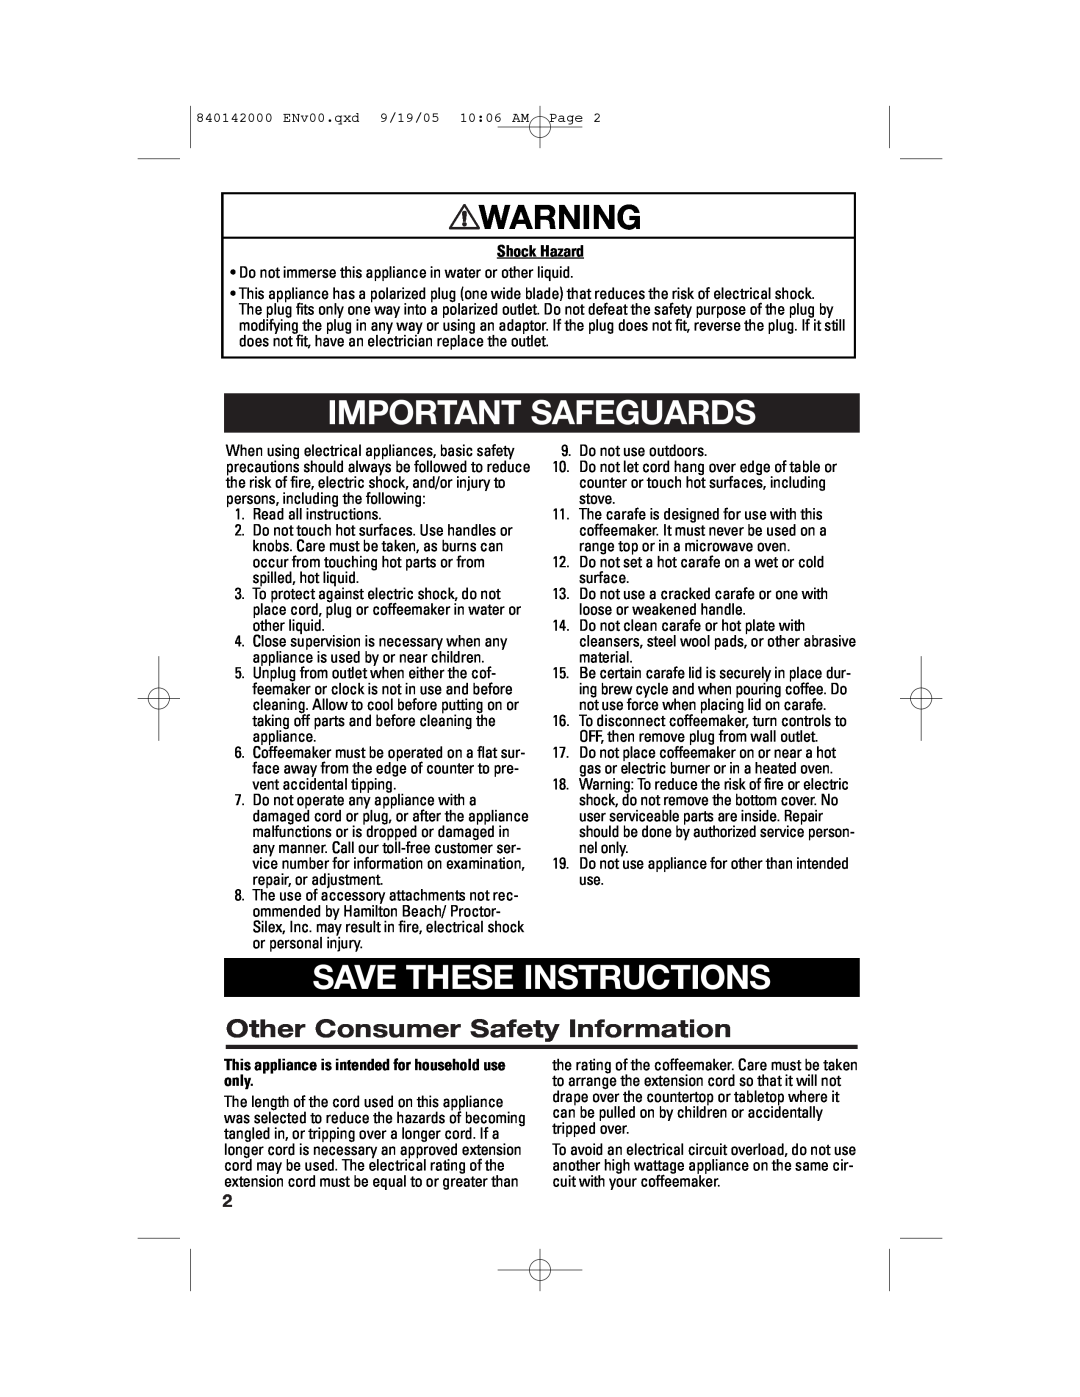 Hamilton Beach 840142000 Important Safeguards, Save These Instructions, Other Consumer Safety Information, Shock Hazard 